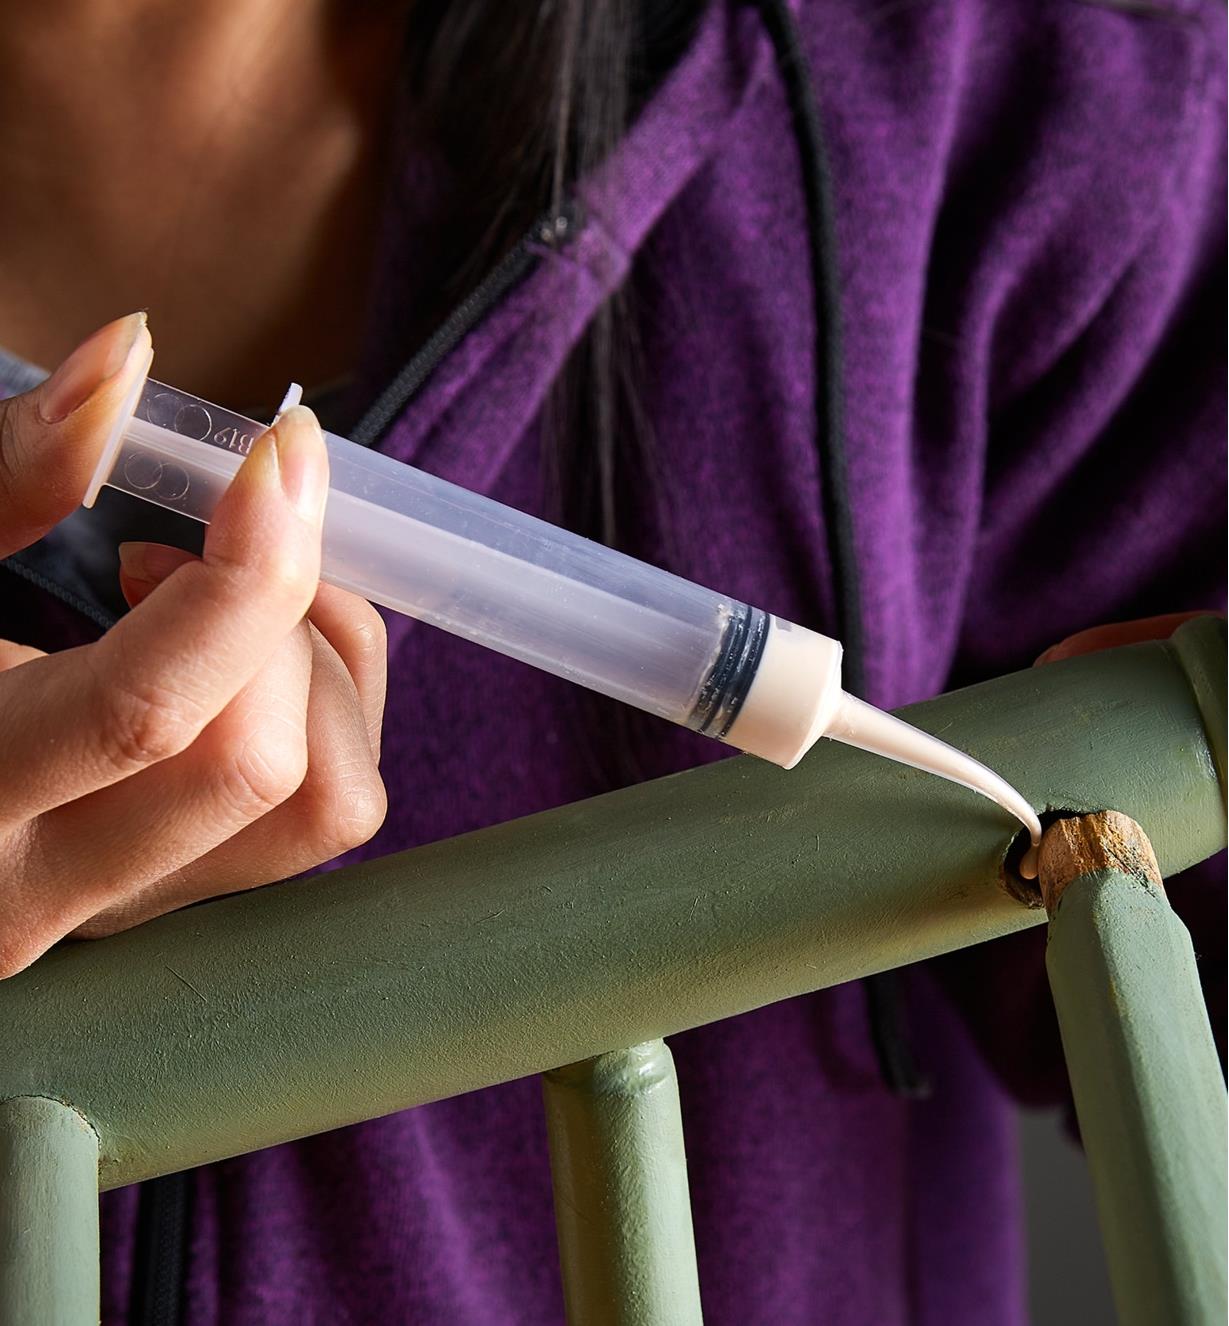 A curved-tip syringe is used to apply glue to the back of a chair